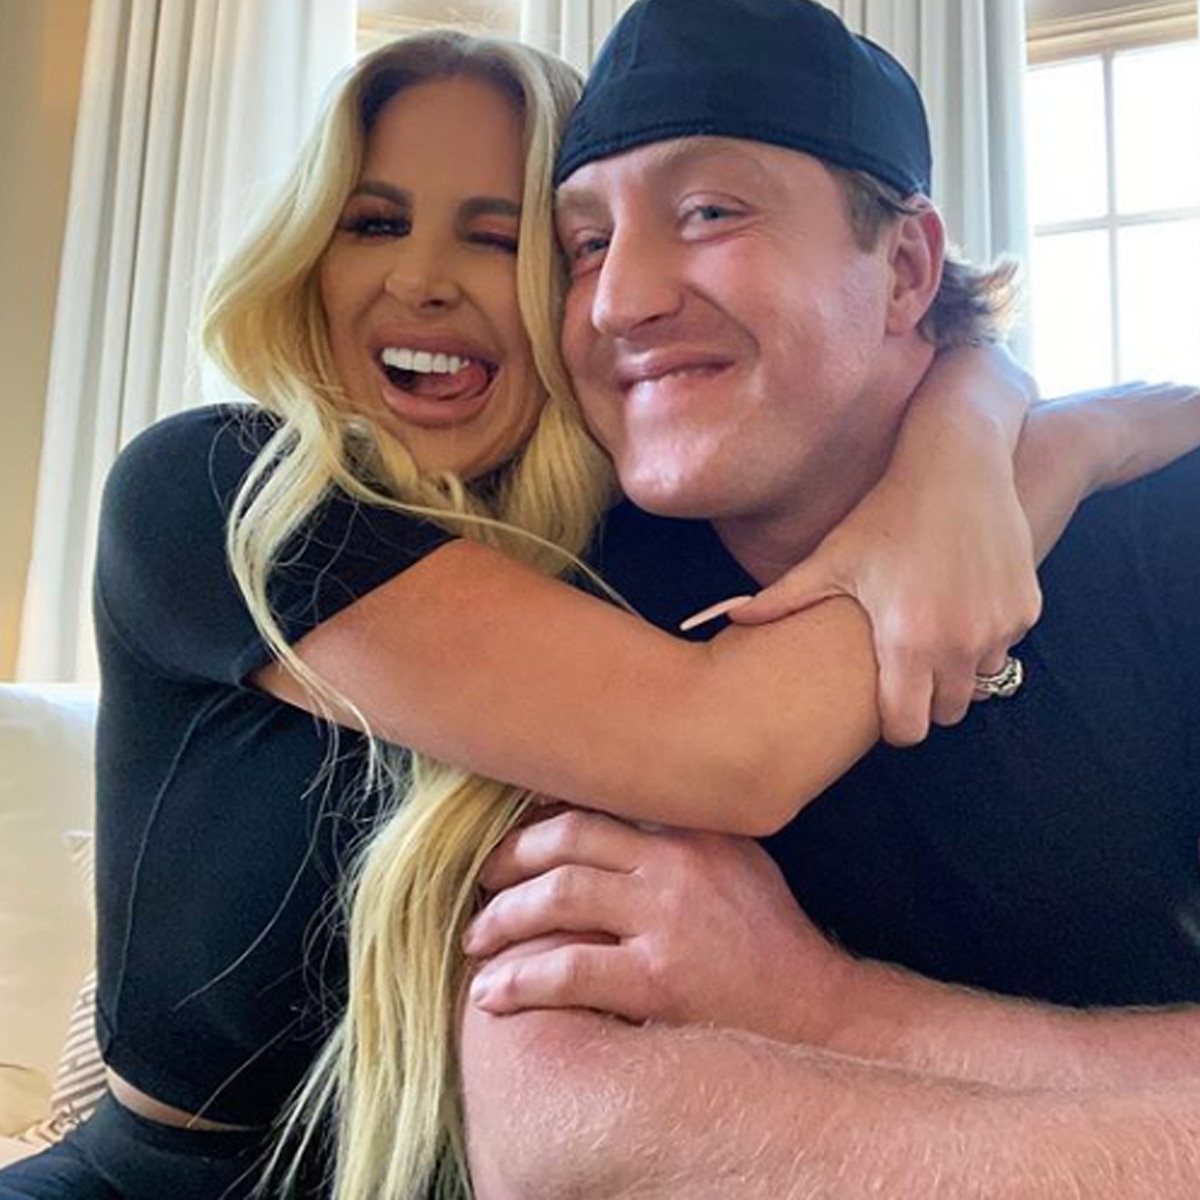 Kim Zolciak Gets Real About Her Sex Life With Kroy Biermann pic